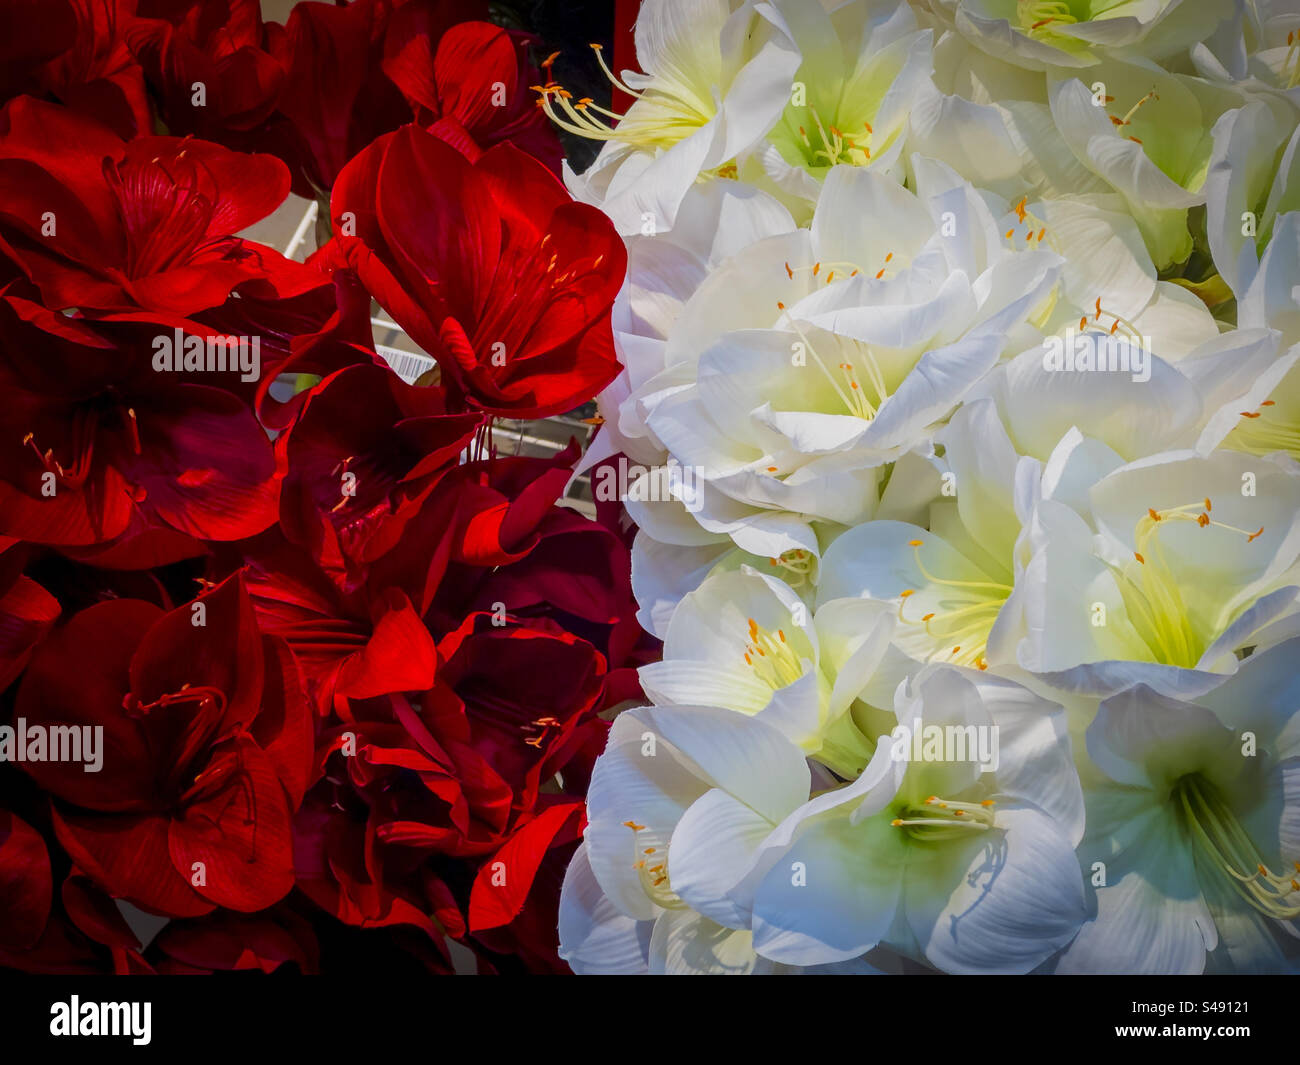 IKEA artificial Christmas flower decorations: Phillip Roberts Stock Photo